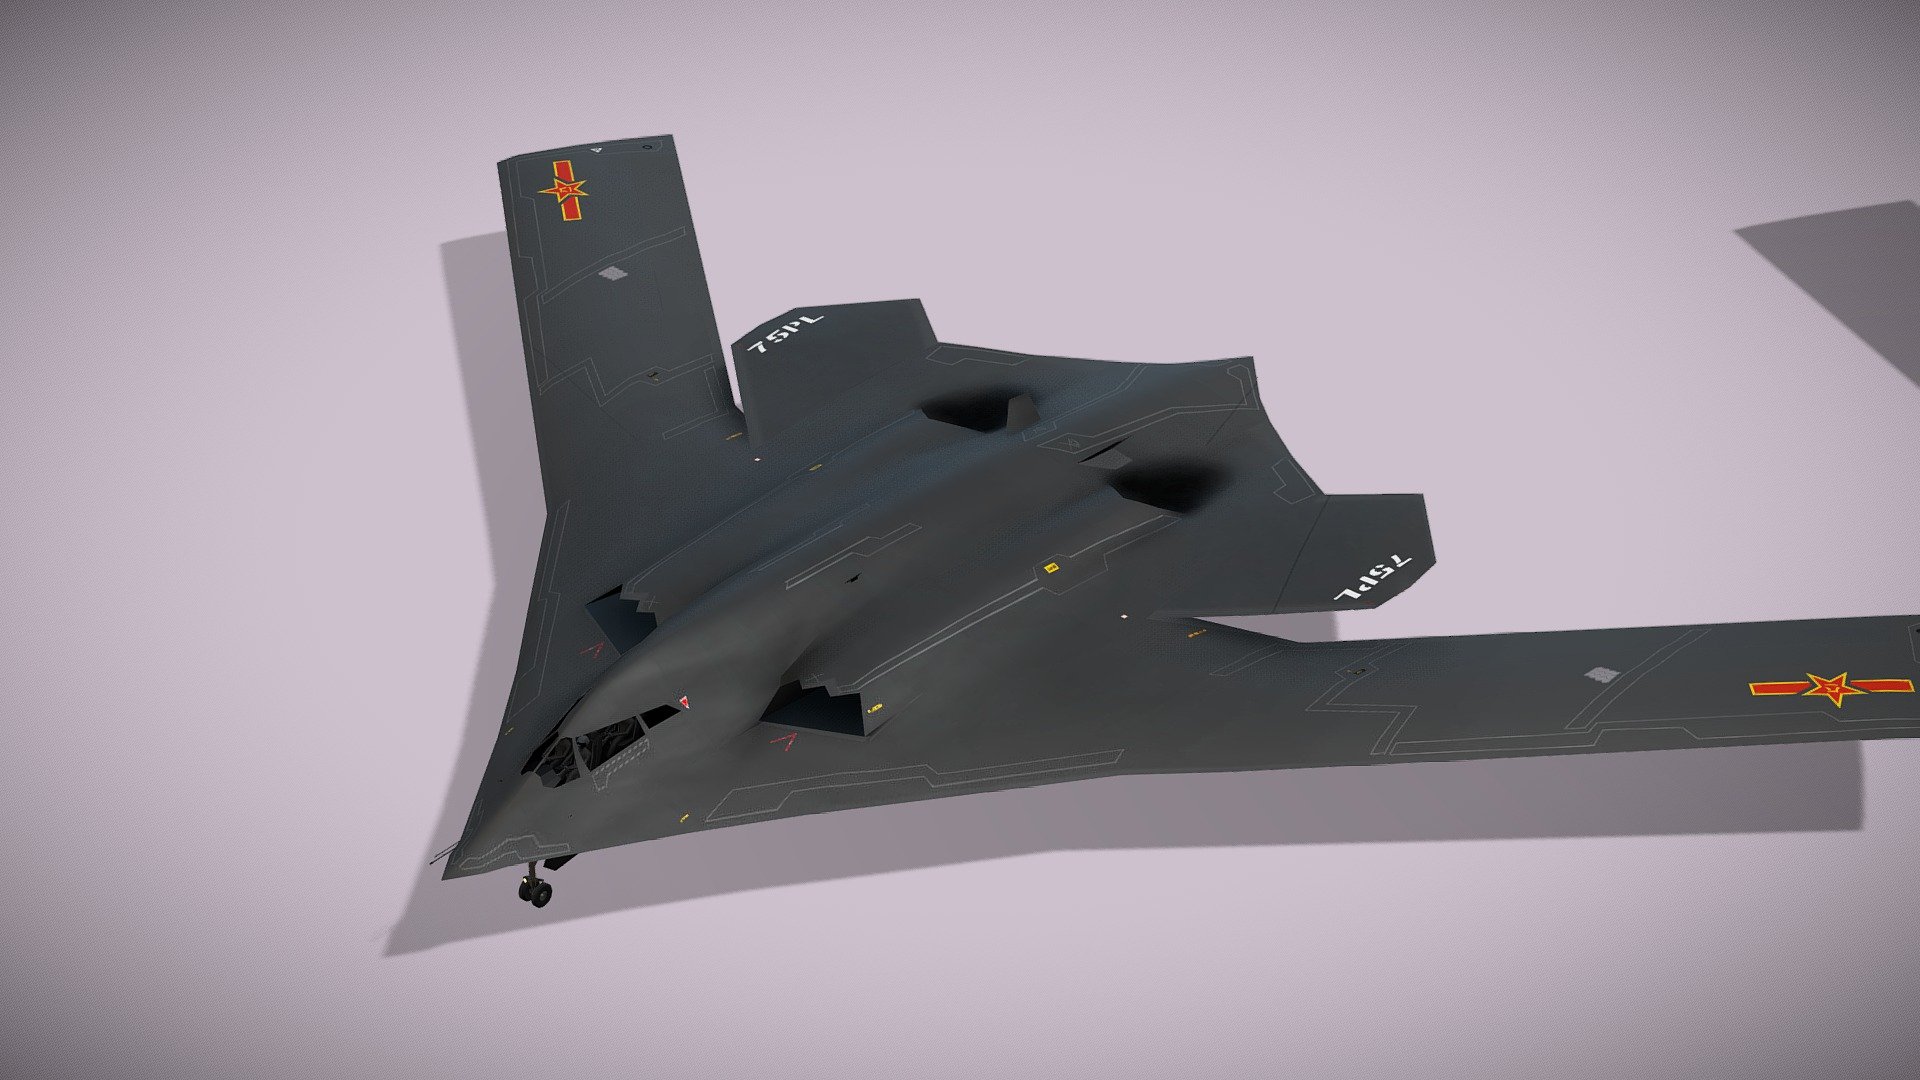 Xian H-20

Lowpoly model of chinese stealth strategic bomber



The Xian H-20 is a projected subsonic stealth bomber design of the People's Liberation Army Air Force. It is referred to as a strategic project by the PLA. The H-20 will be the first dedicated strategic bomber developed by China. The aircraft may enter service in the 2020s. H-20 is expected to be a flying wing with a range of at least 8500 km and a payload capacity of at least 10 tonnes. Defense analysts have noted several recurring features on these models, including serrated air intakes, cranked-kite wings, and foldable twin tail surfaces that can be switched between being horizontal tailplanes and V-tails.



Fully rigged

Model has roughness map and 2 x diffuse textures

Including 3D print STL file




Check also my aircrafts and cars

Patreon with monthly free model - Xian H-20 stealth bomber - Buy Royalty Free 3D model by NETRUNNER_pl 3d model